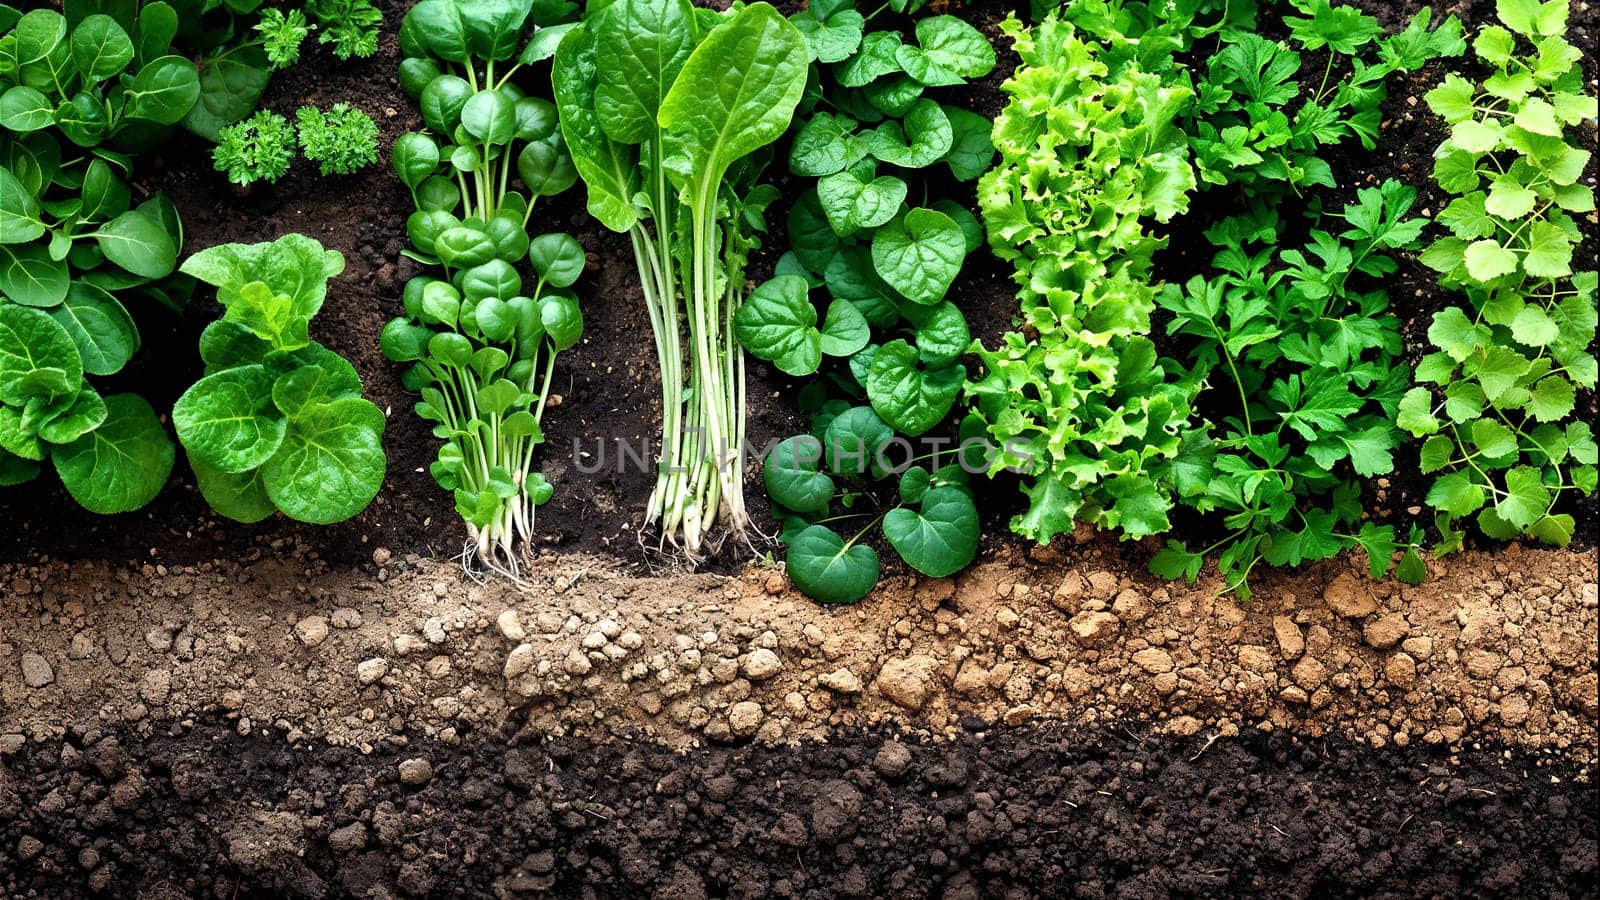 A top view of various vegetables growing in the soil